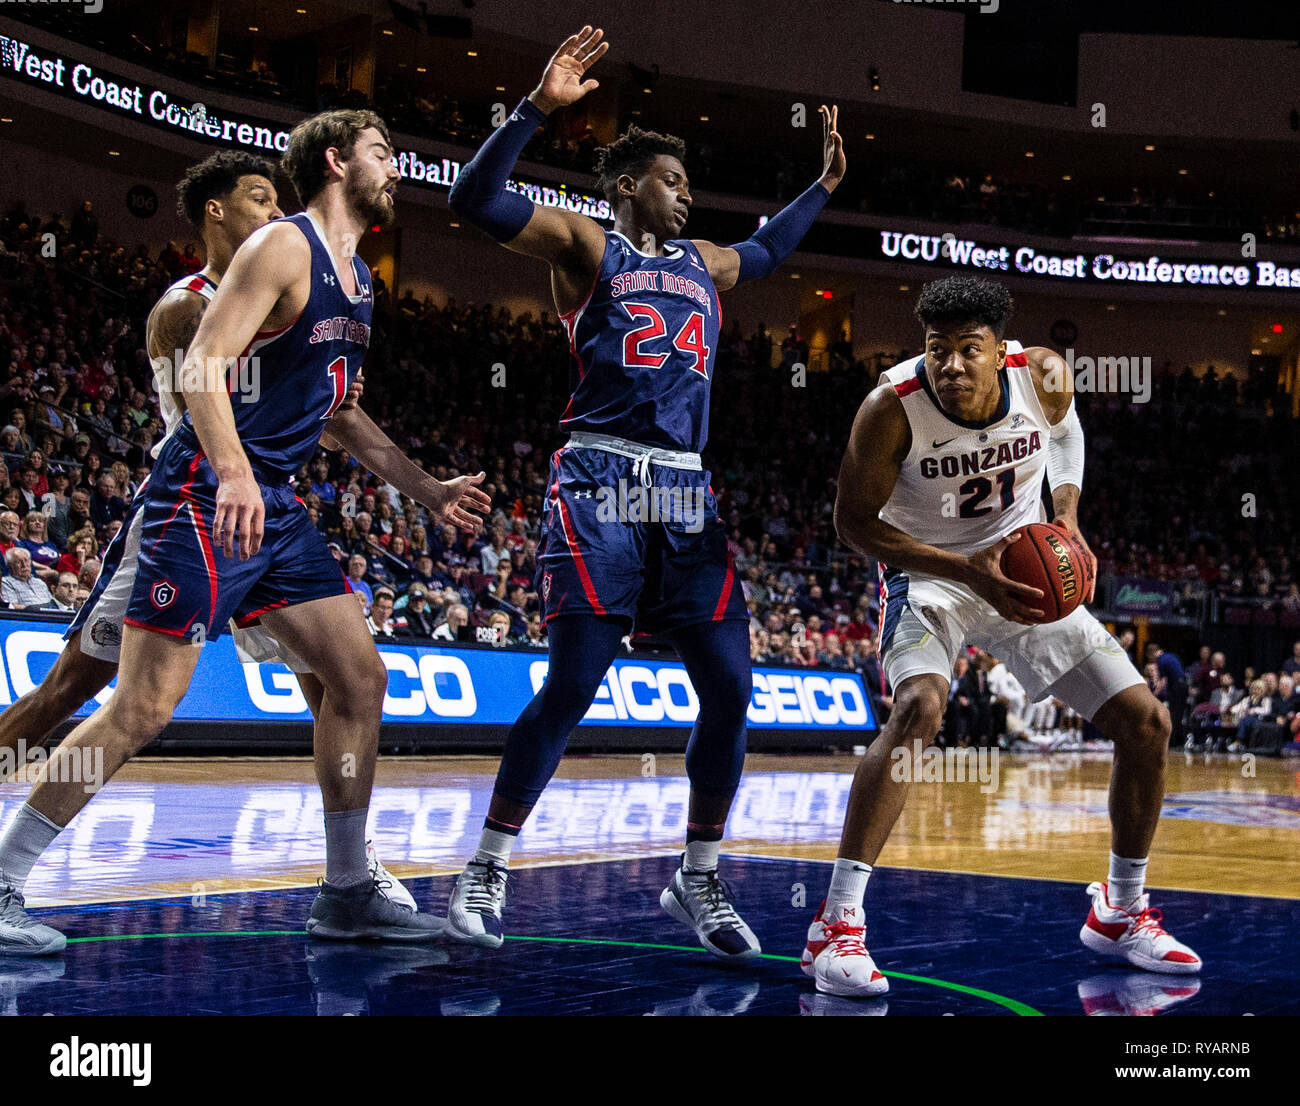 Mar 12 2019 Las Vegas, NV, U.S.A. Gonzaga forward Rui Hachimura (21) drives to the basket during the NCAA West Coast Conference Men's Basketball Tournament championship between the Gonzaga Bulldogs and the Saint Mary's Gaels 47-60 lost at Orleans Arena Las Vegas, NV. Thurman James/CSM Stock Photo